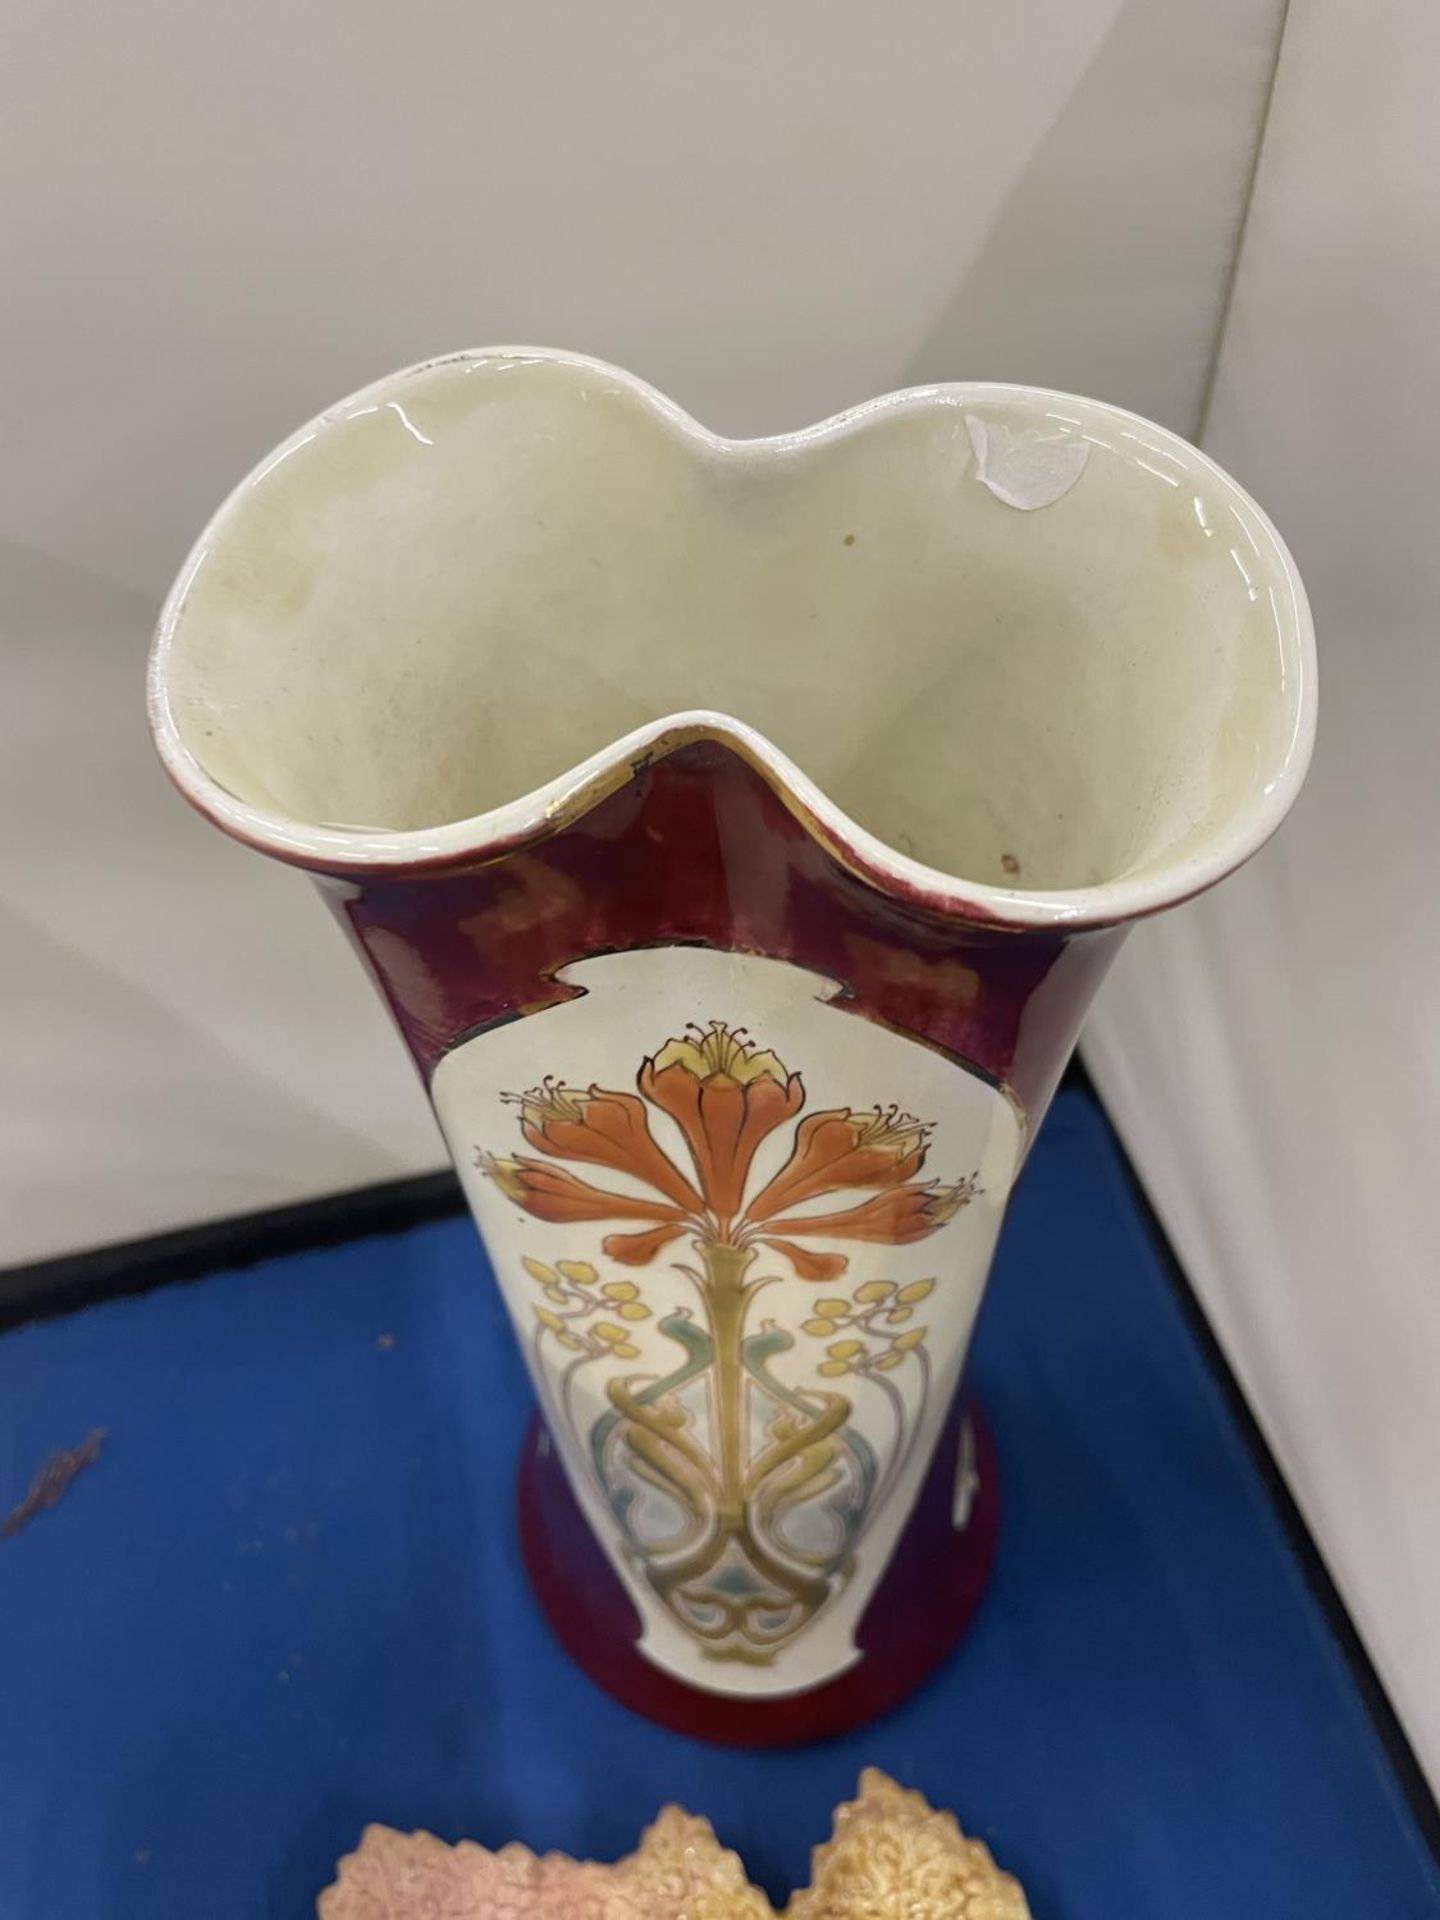 A LATE 19TH EARLY/20TH CENTURY TUBELINED ART NOUVEAU VASE AND A LEAF DISH - Image 6 of 12